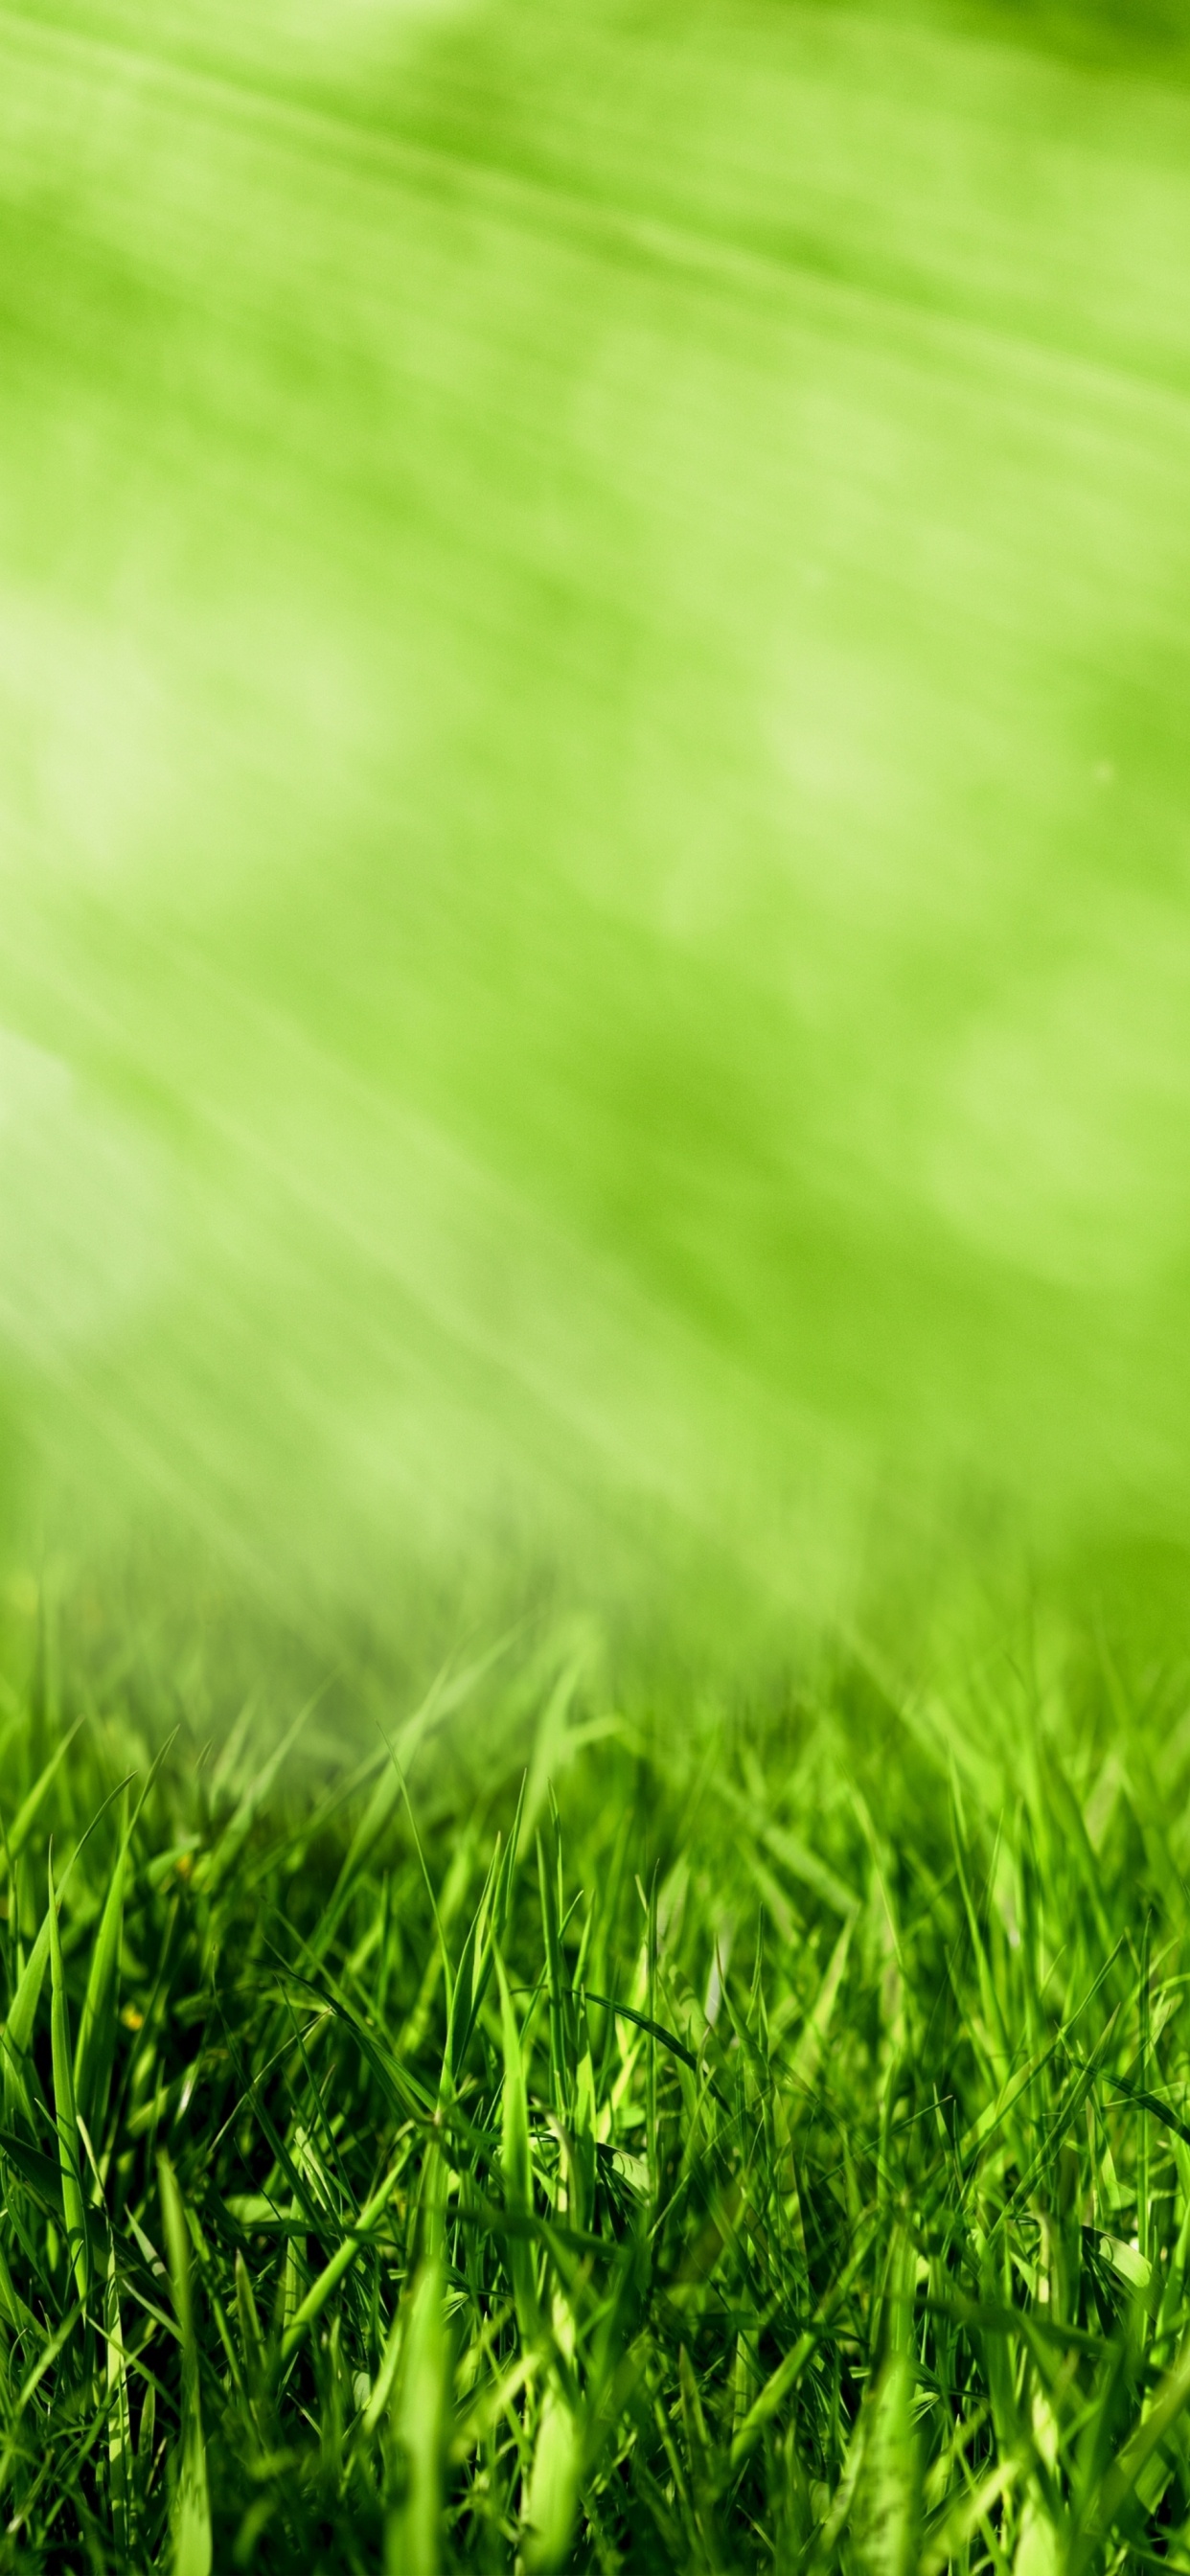 Water Droplets on Green Grass During Daytime. Wallpaper in 1242x2688 Resolution